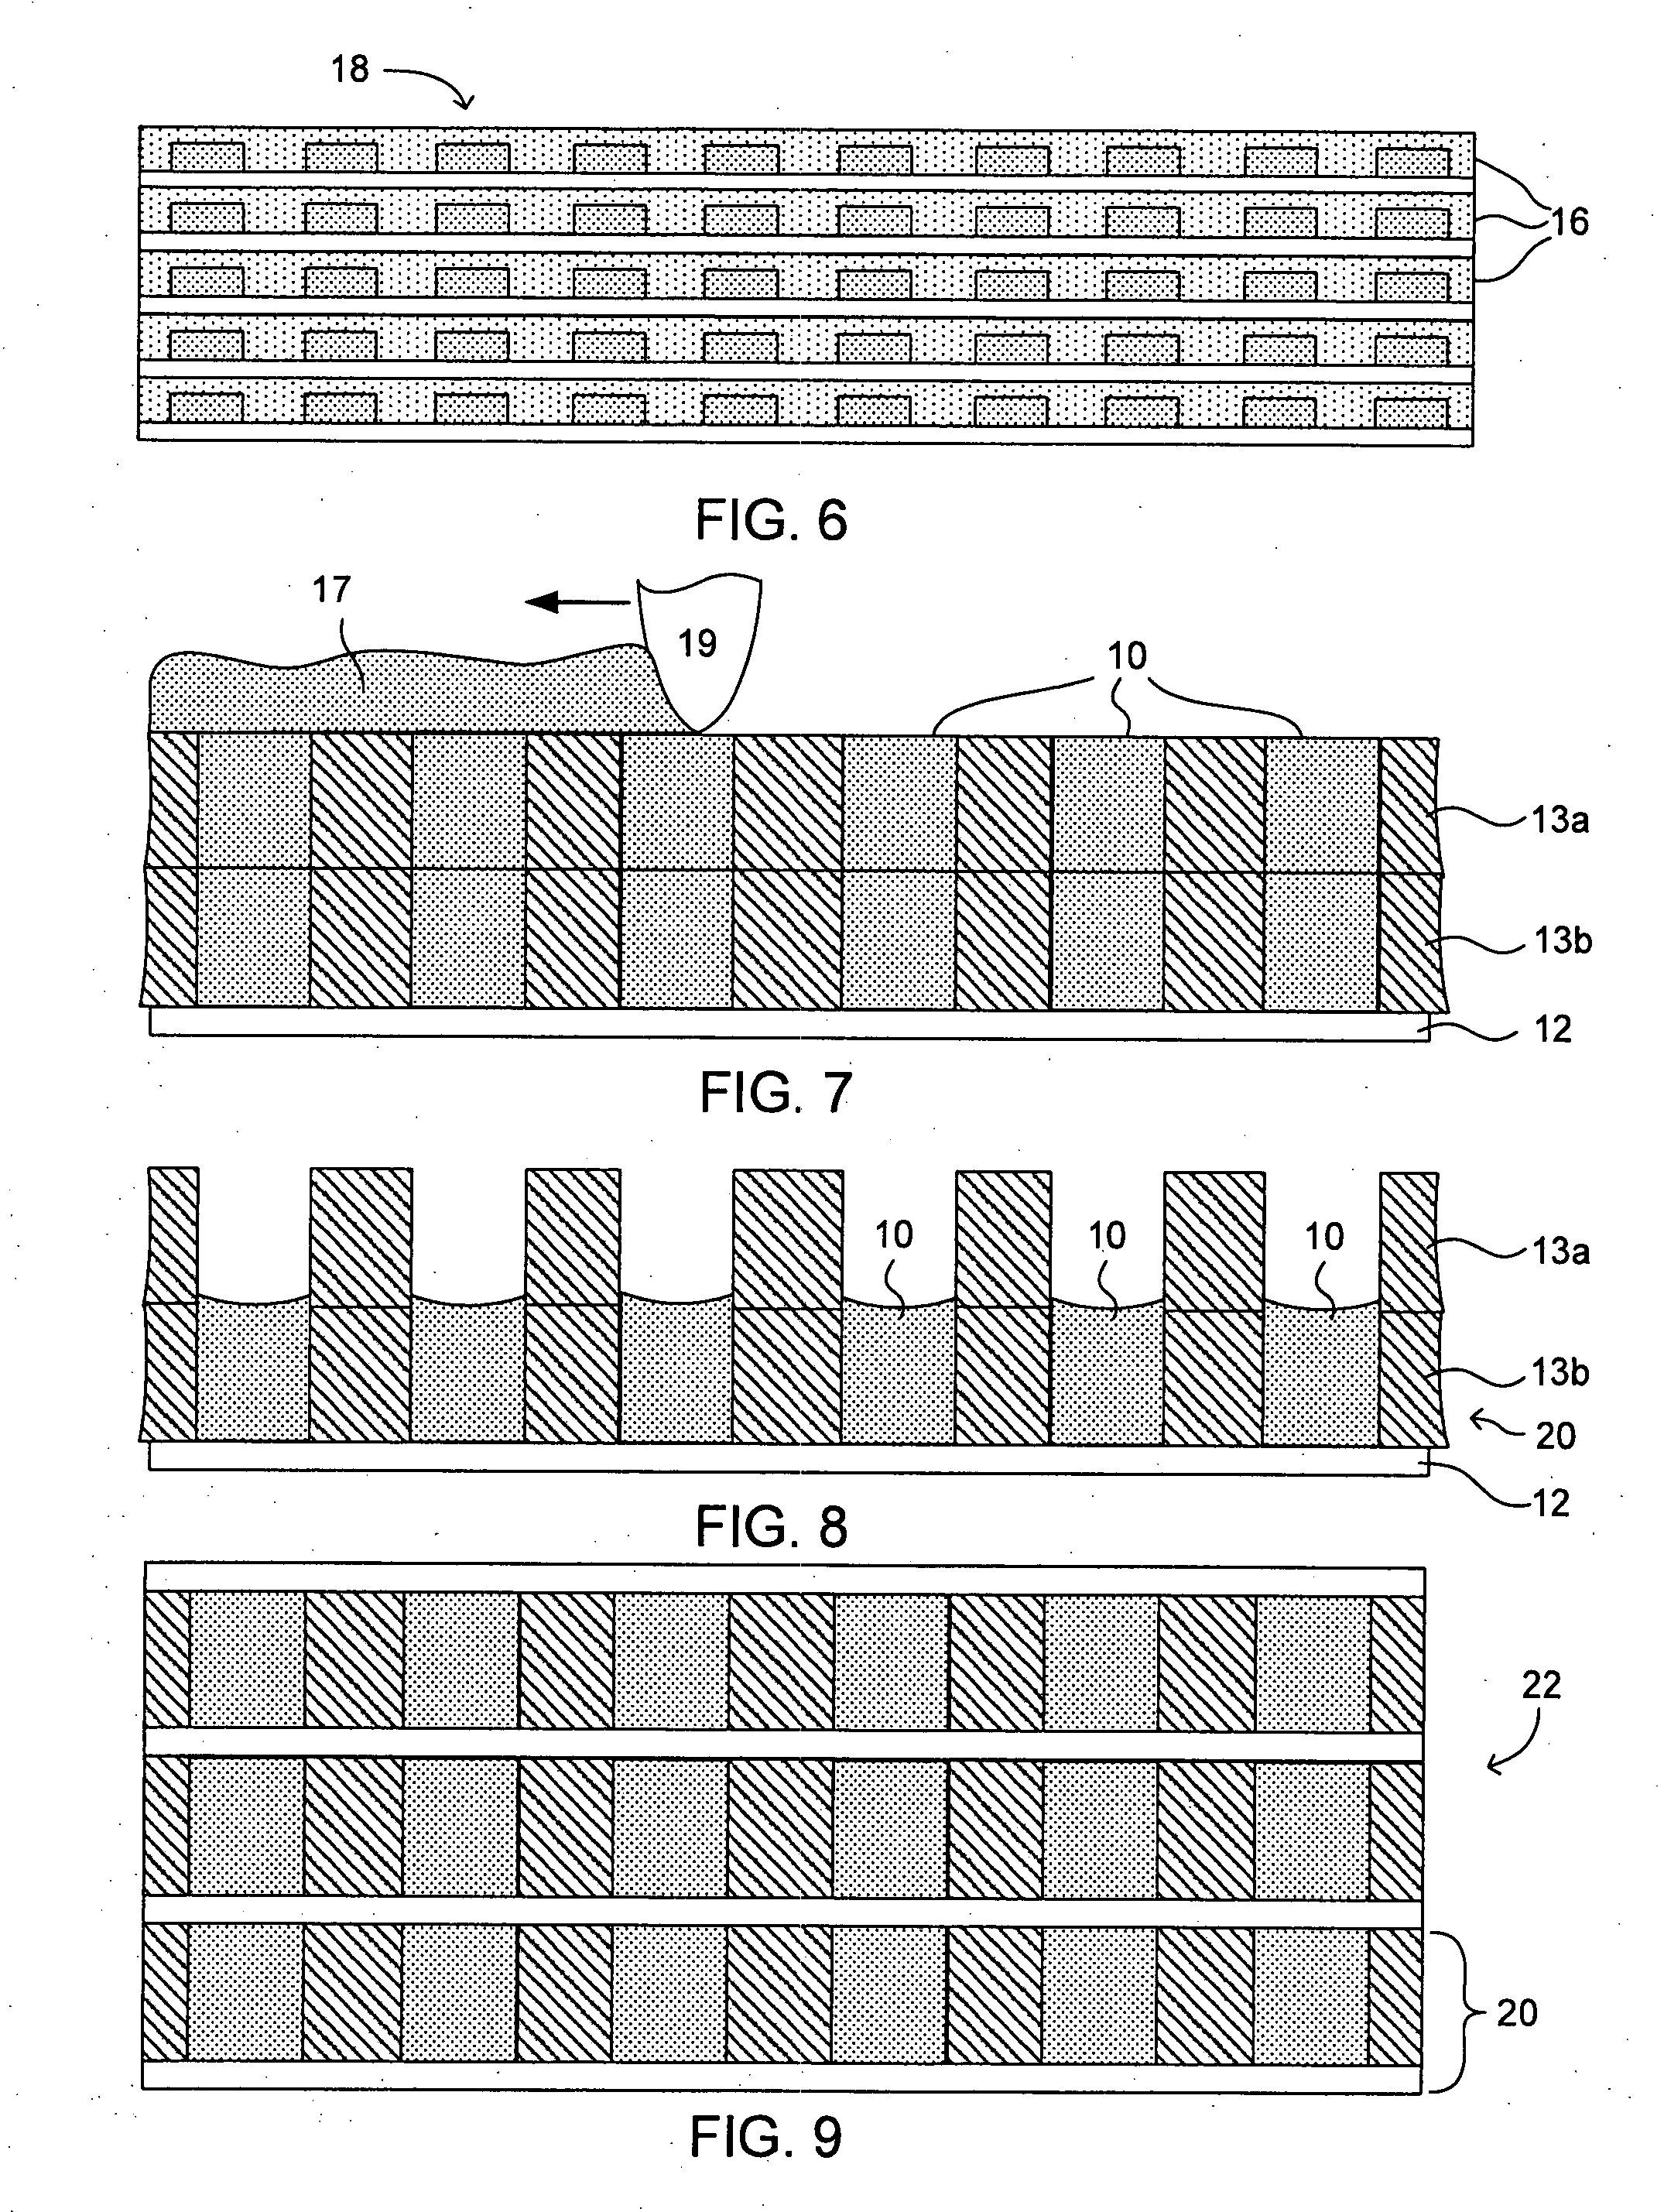 Polycrystalline grits and associated methods